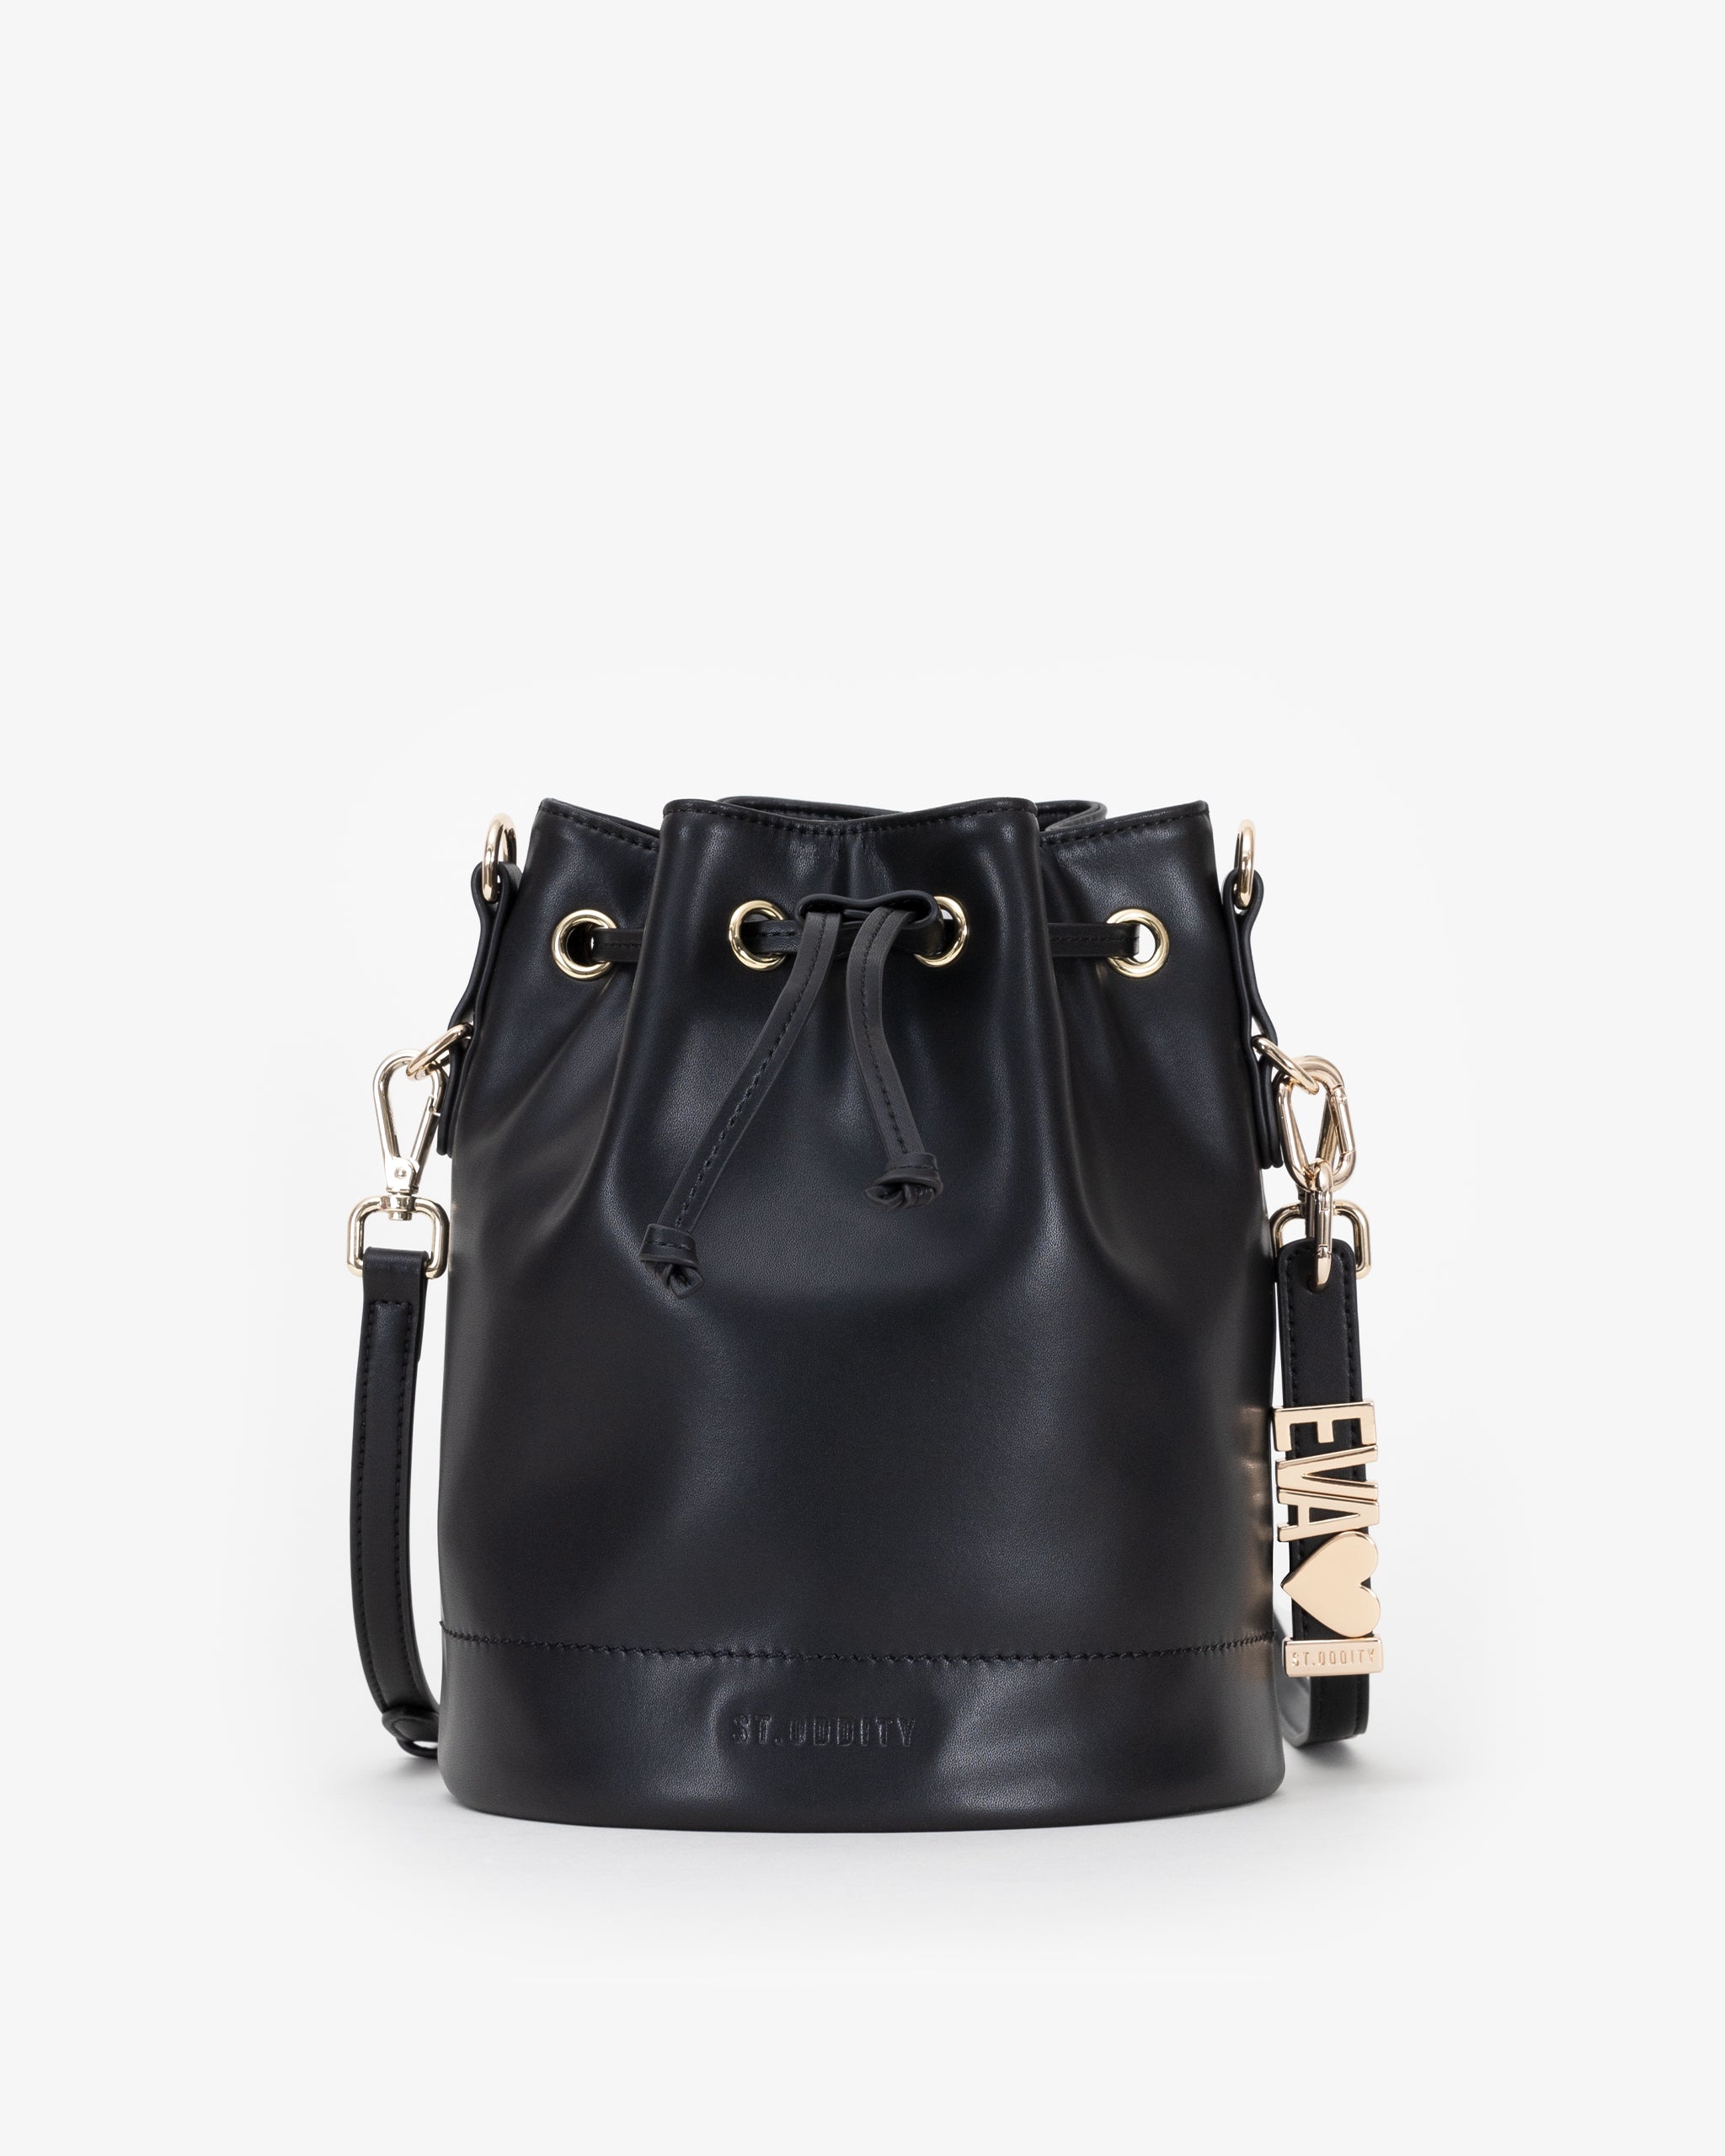 Pre-order (Mid-May): Bucket Bag in Black/Gold with Personalised Hardware